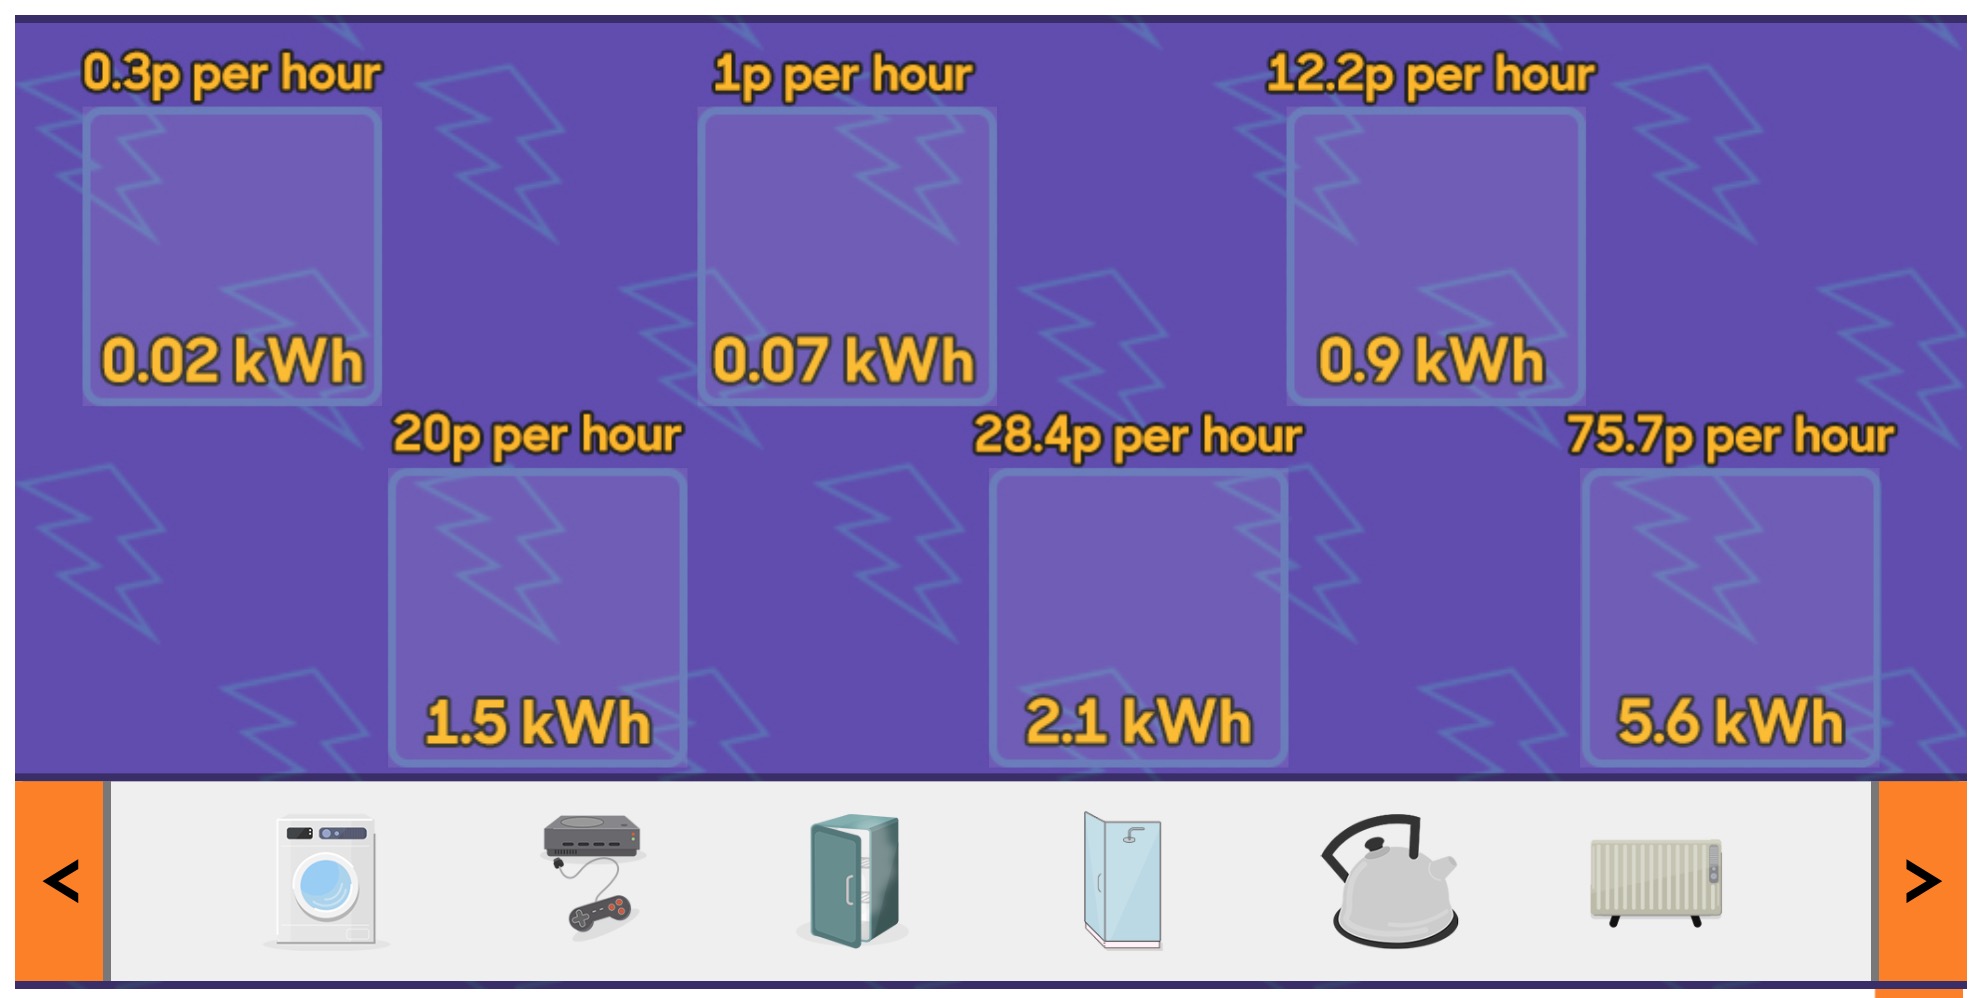 Pictures 1 - Cost in British pounds £ per KWH.jpg